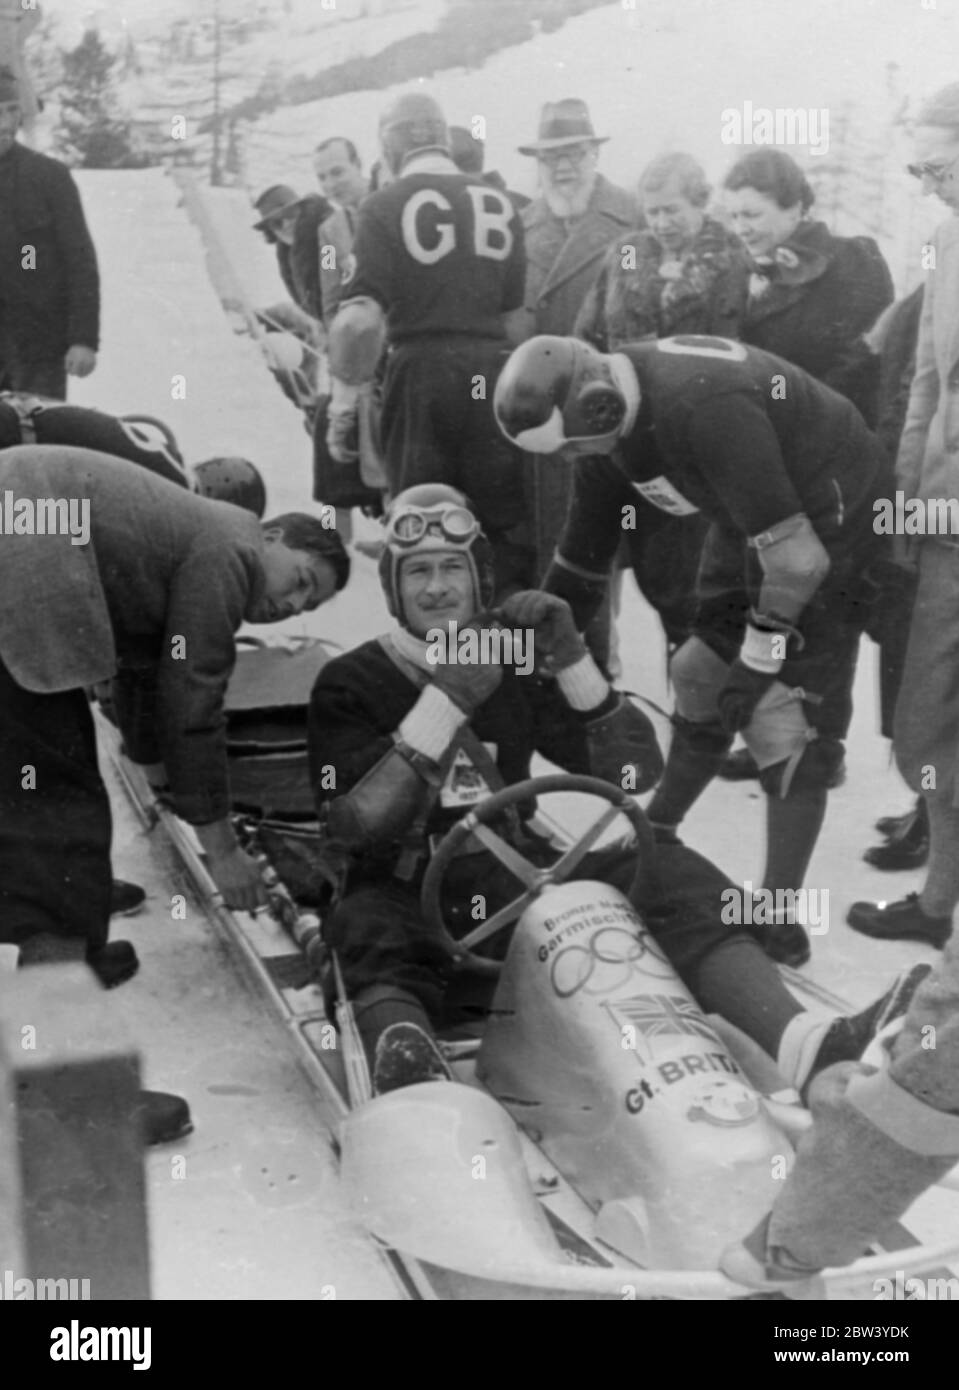 Britain wins world bobsleigh championship at St Moritz. Captain by F. J. McEvoy, the Olympics sleigher, the British team won the world four-man bobsleigh championship from Germany (second) and America at St Moritz. The team had an aggregate for four runs of 5 minutes 8.5 seconds. Photo shows: F. J. McEvoy and his team at the start of last run at St Moritz. 13 February 1937 Stock Photo